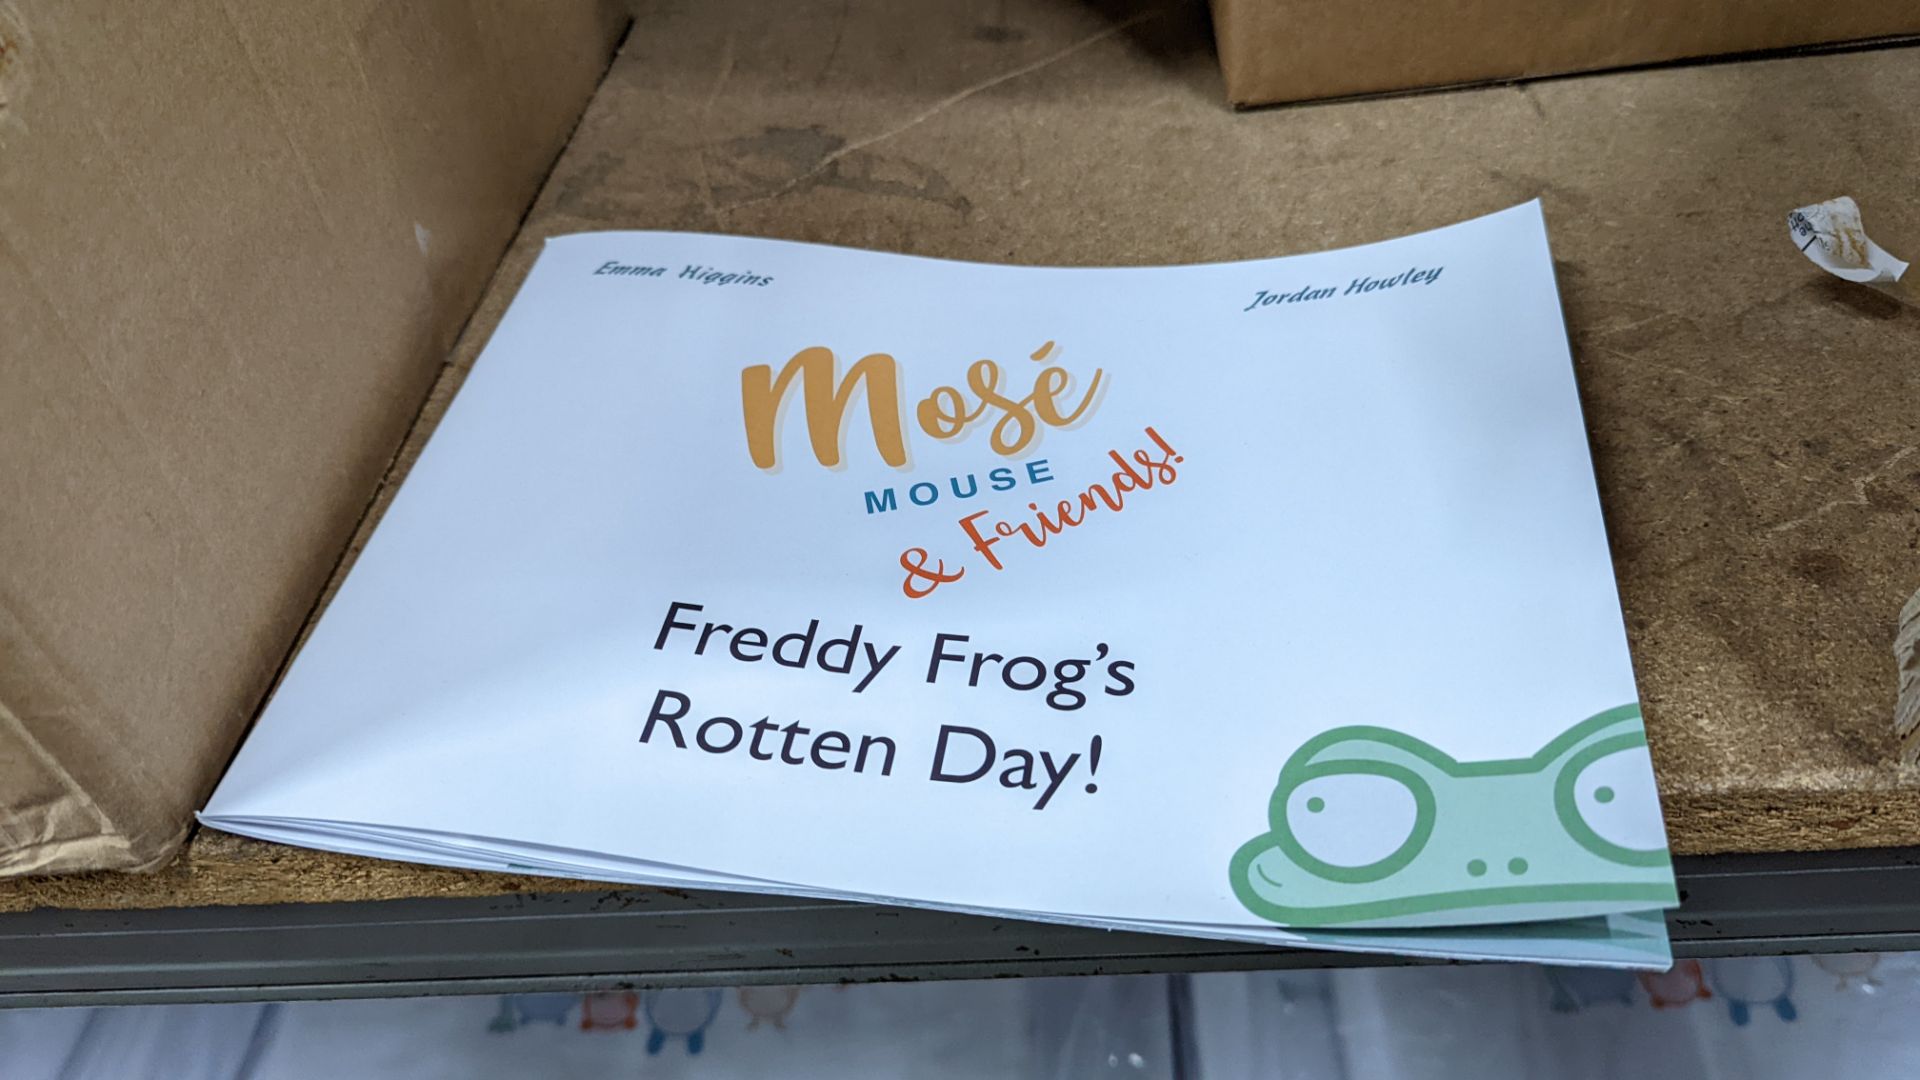 Approximately 55 Mosé Mouse & Friends! Freddy Frog's Rotten Day! book by Emma Higgins and Jordan How - Image 3 of 3